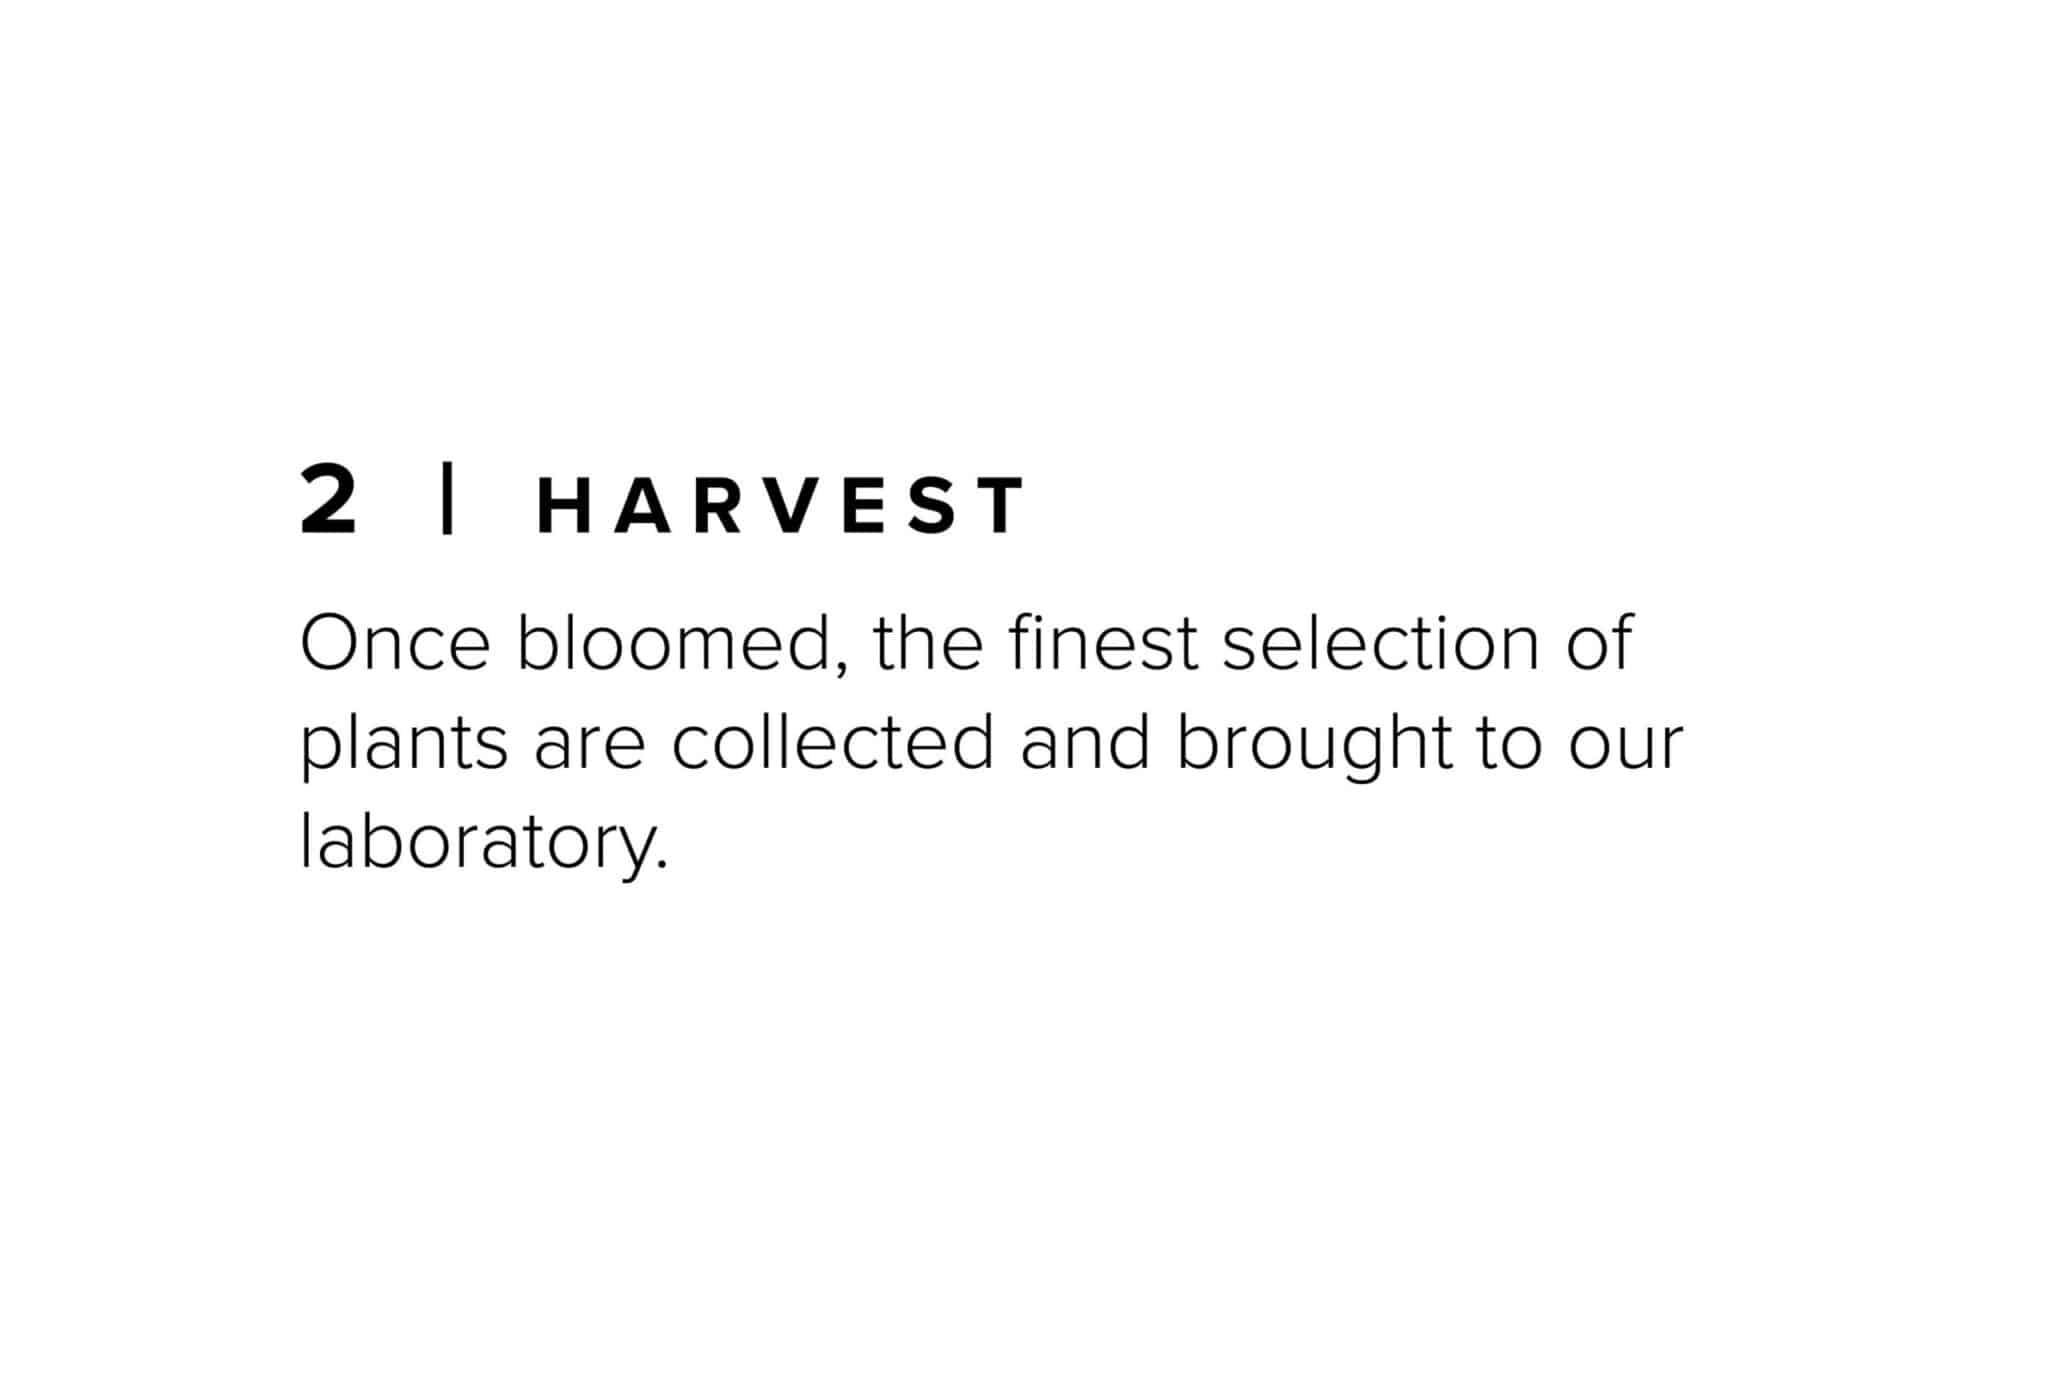 A picture of the word harvest in an english language.